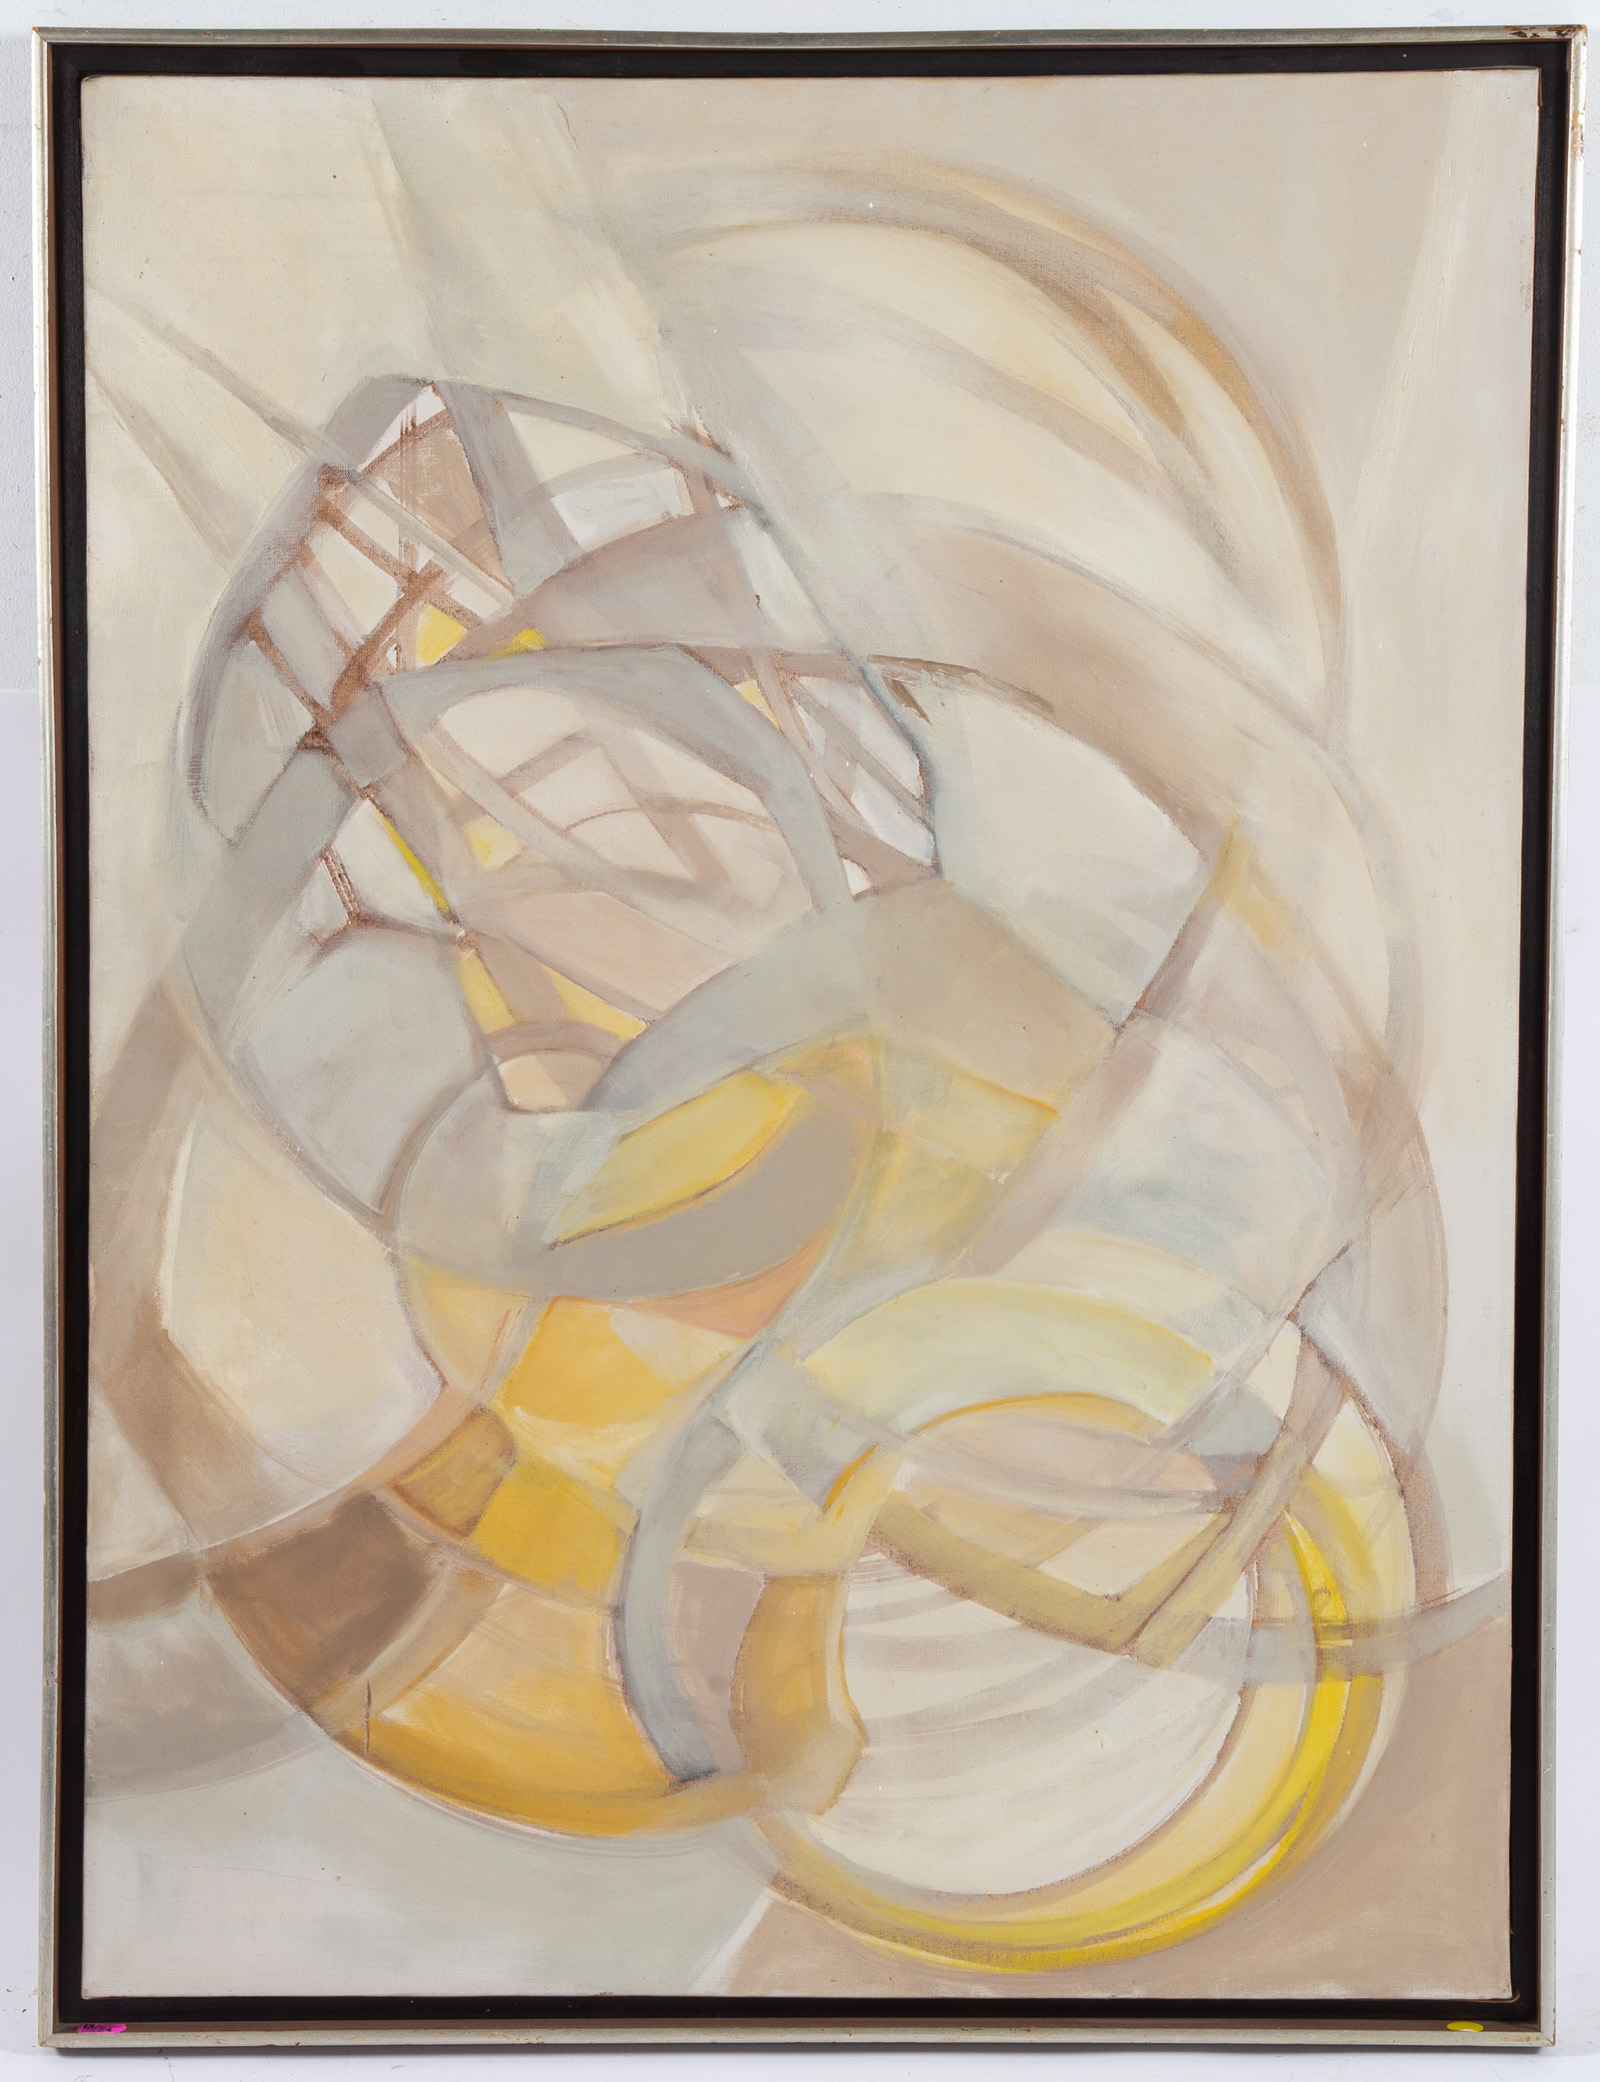 E.L. TAYLOR. UNTITLED ABSTRACT,